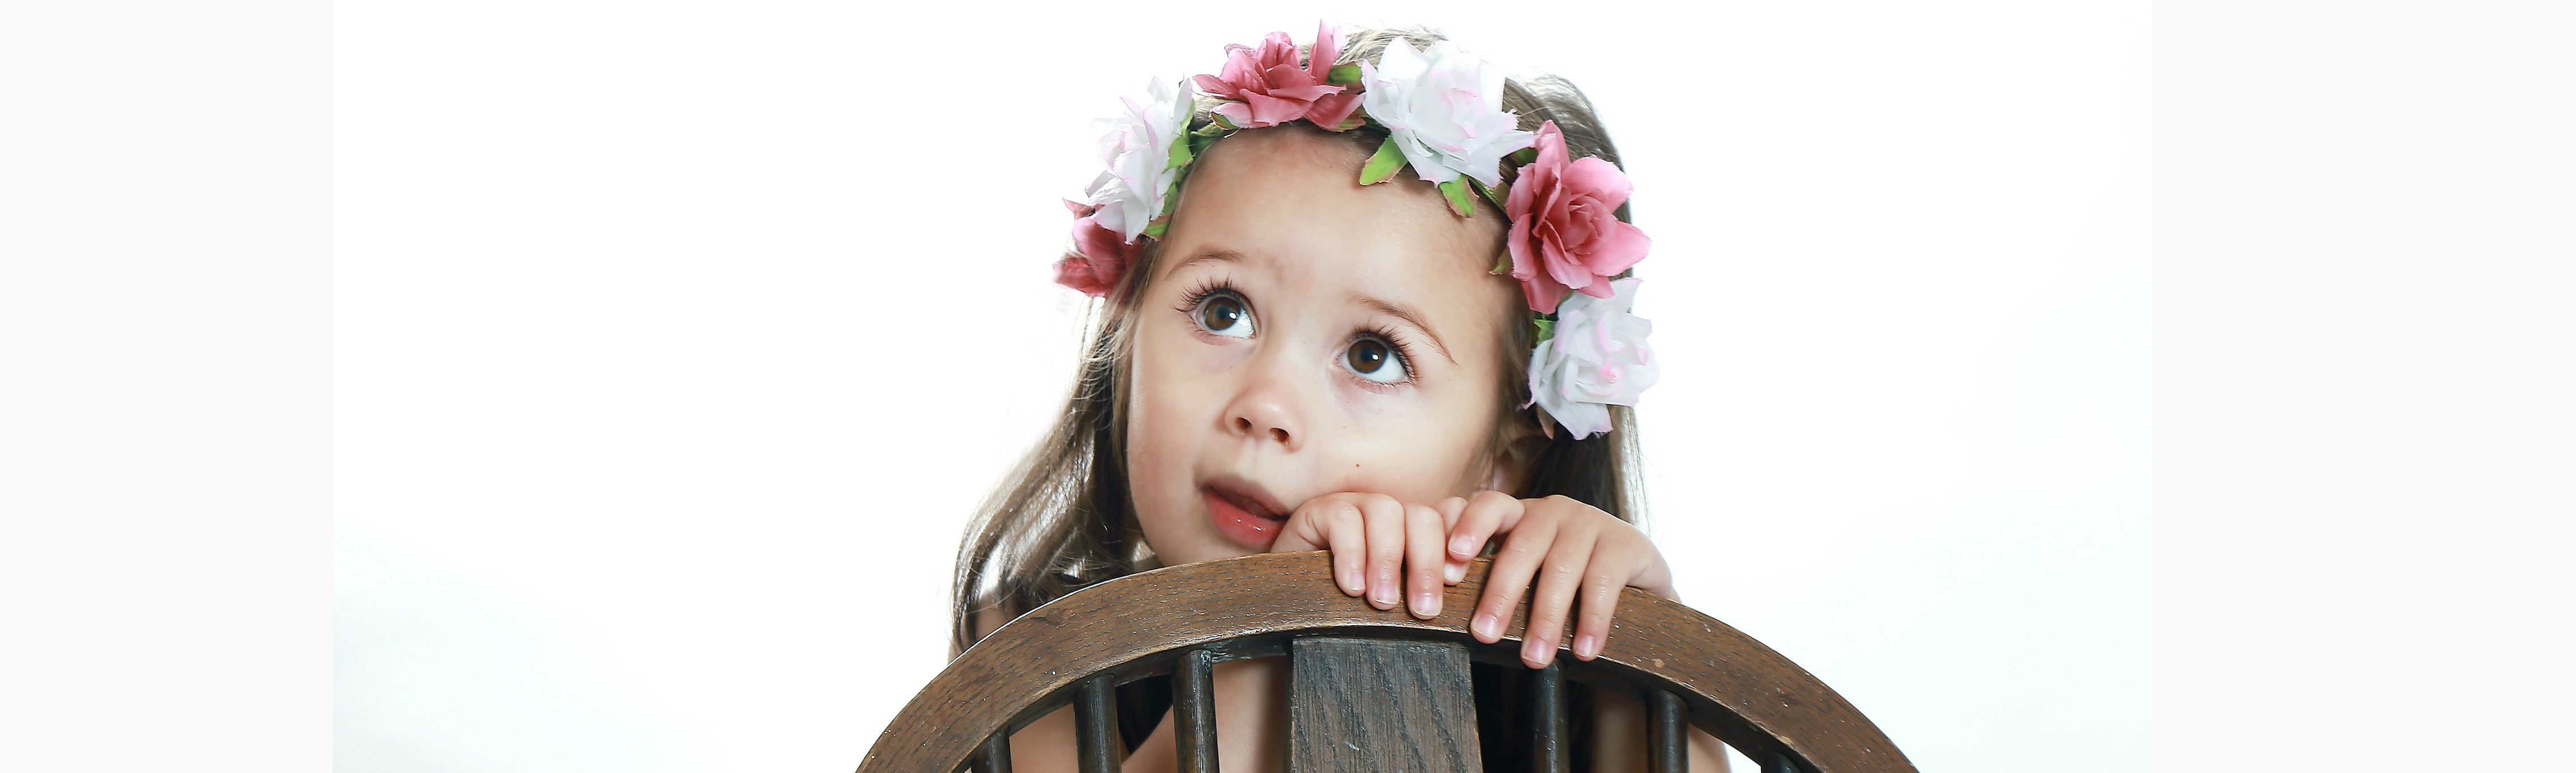 Photograph of a Young girl with flower crown